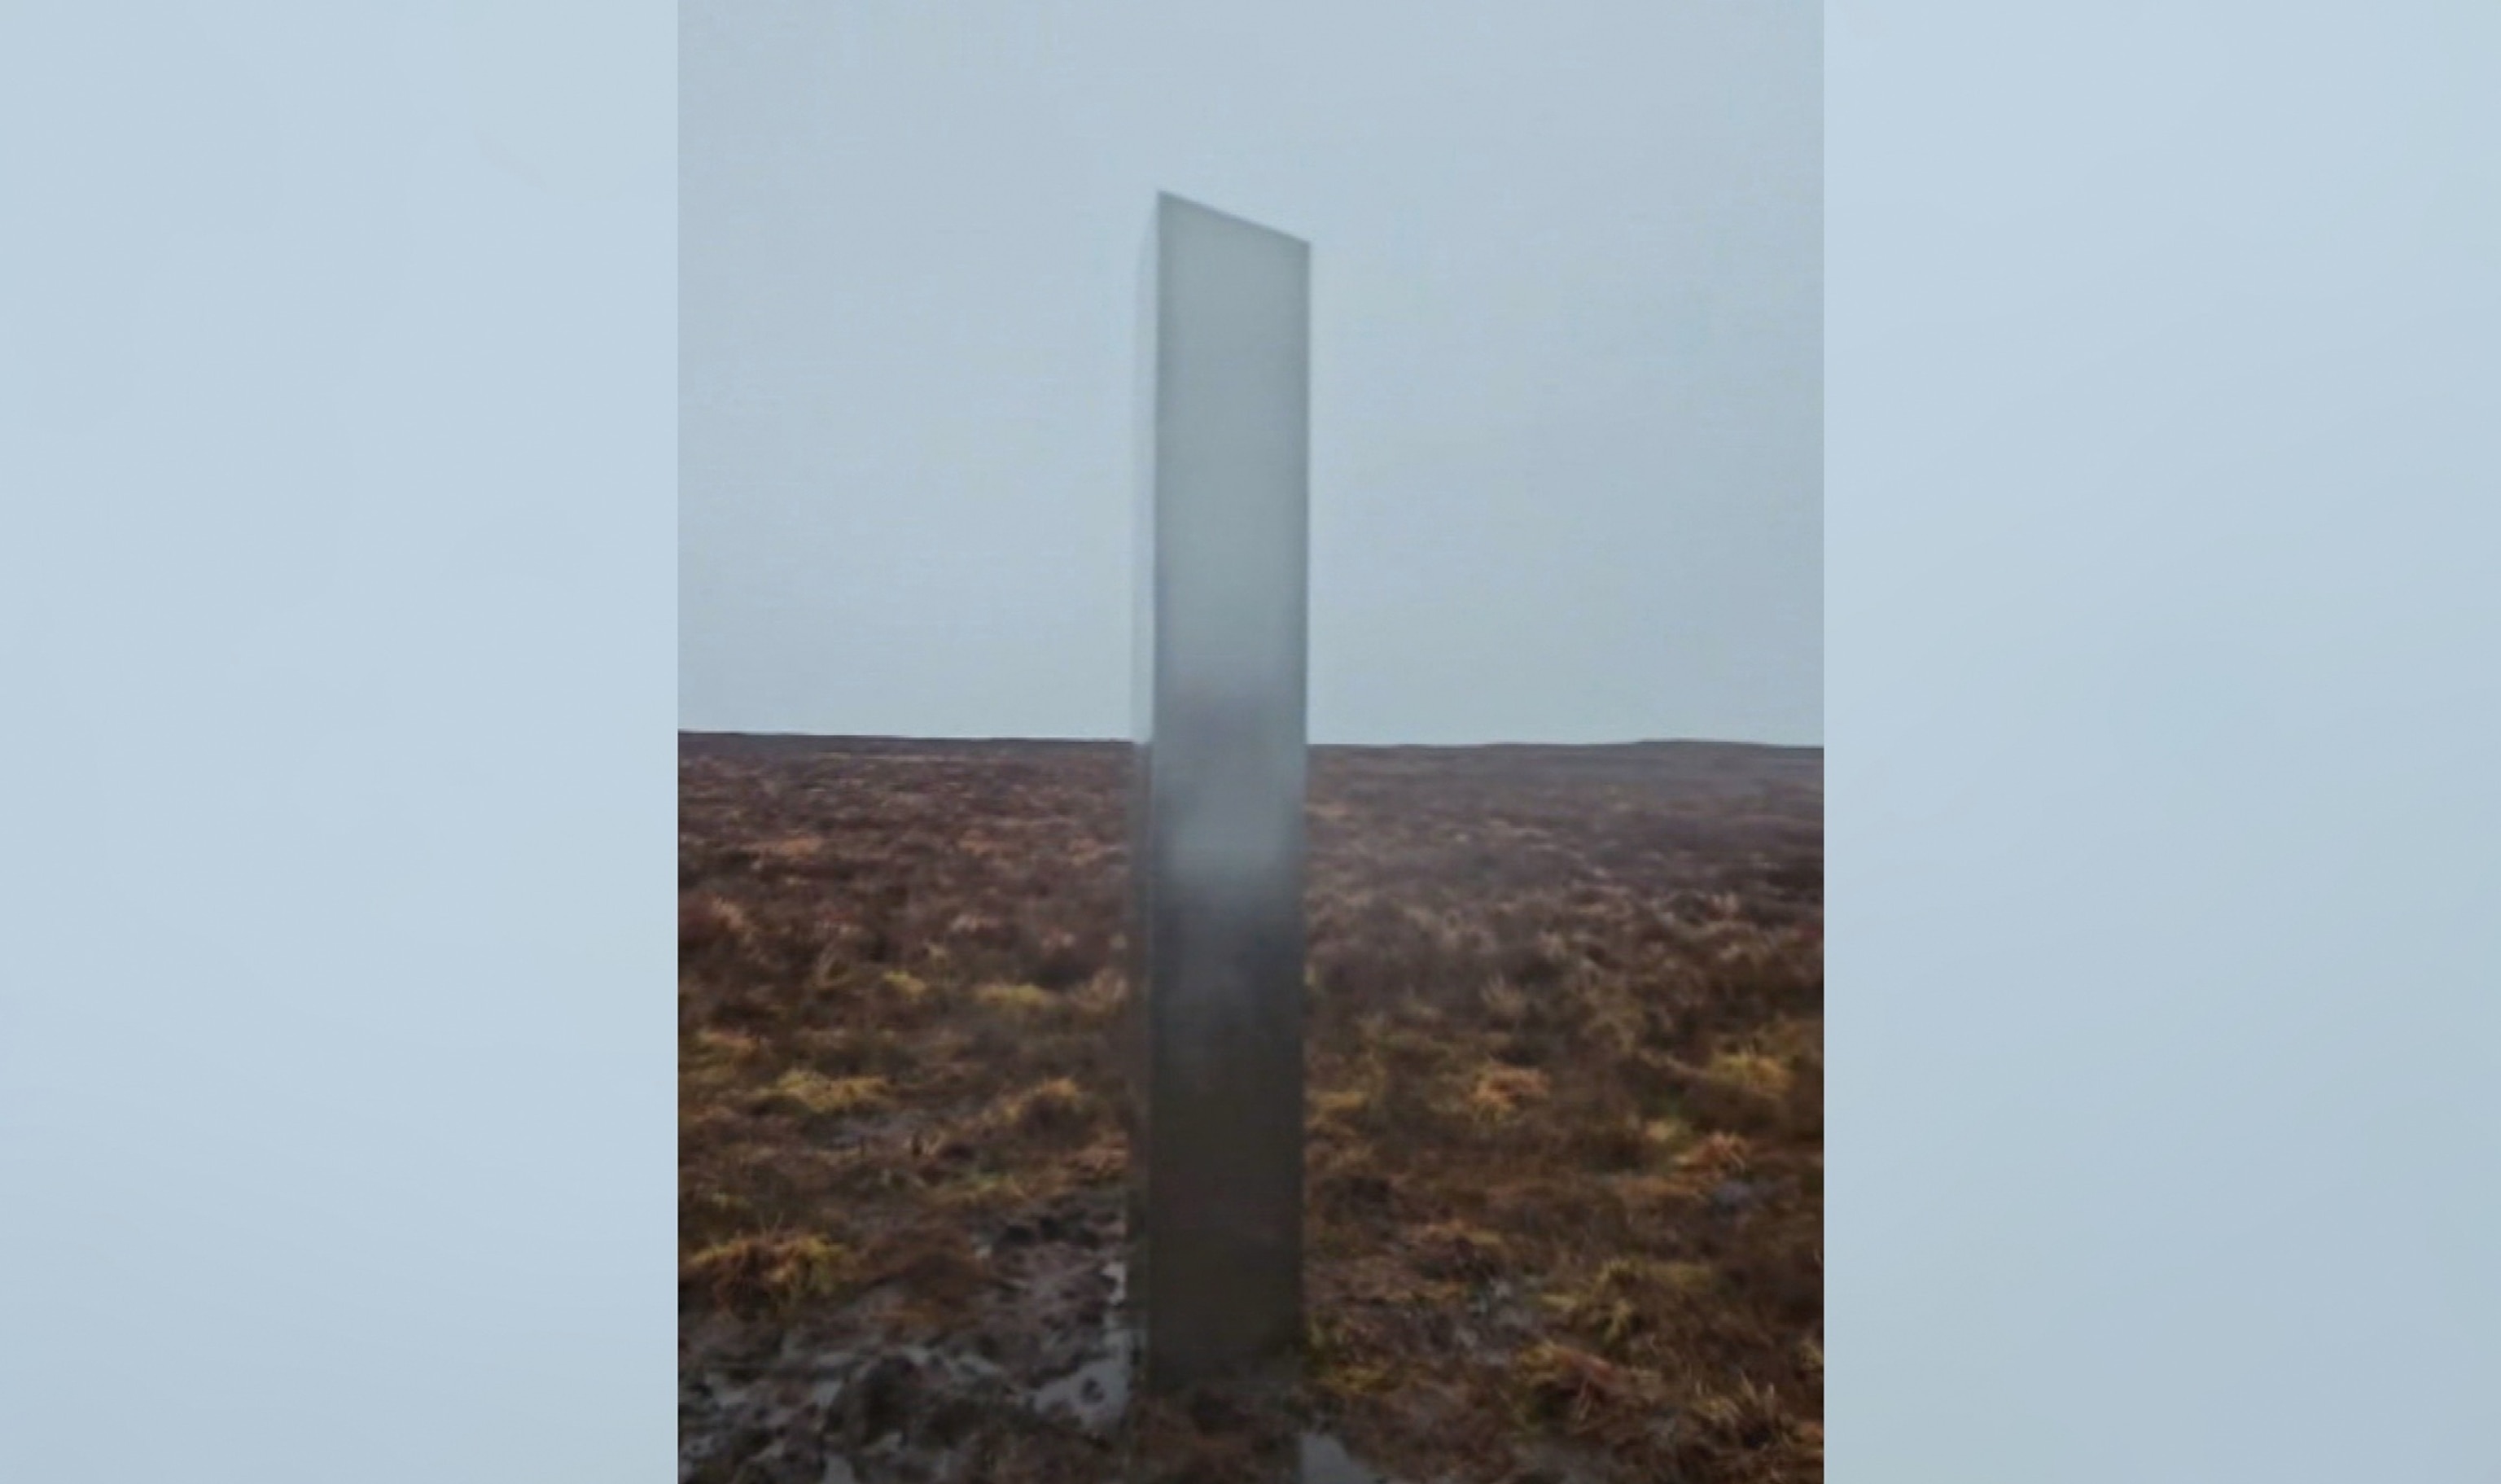 PHOTO: A mysterious, roughly 10-foot-tall silver metal monolith was discovered on a muddy bluff in Wales by hiker Craig Muir.